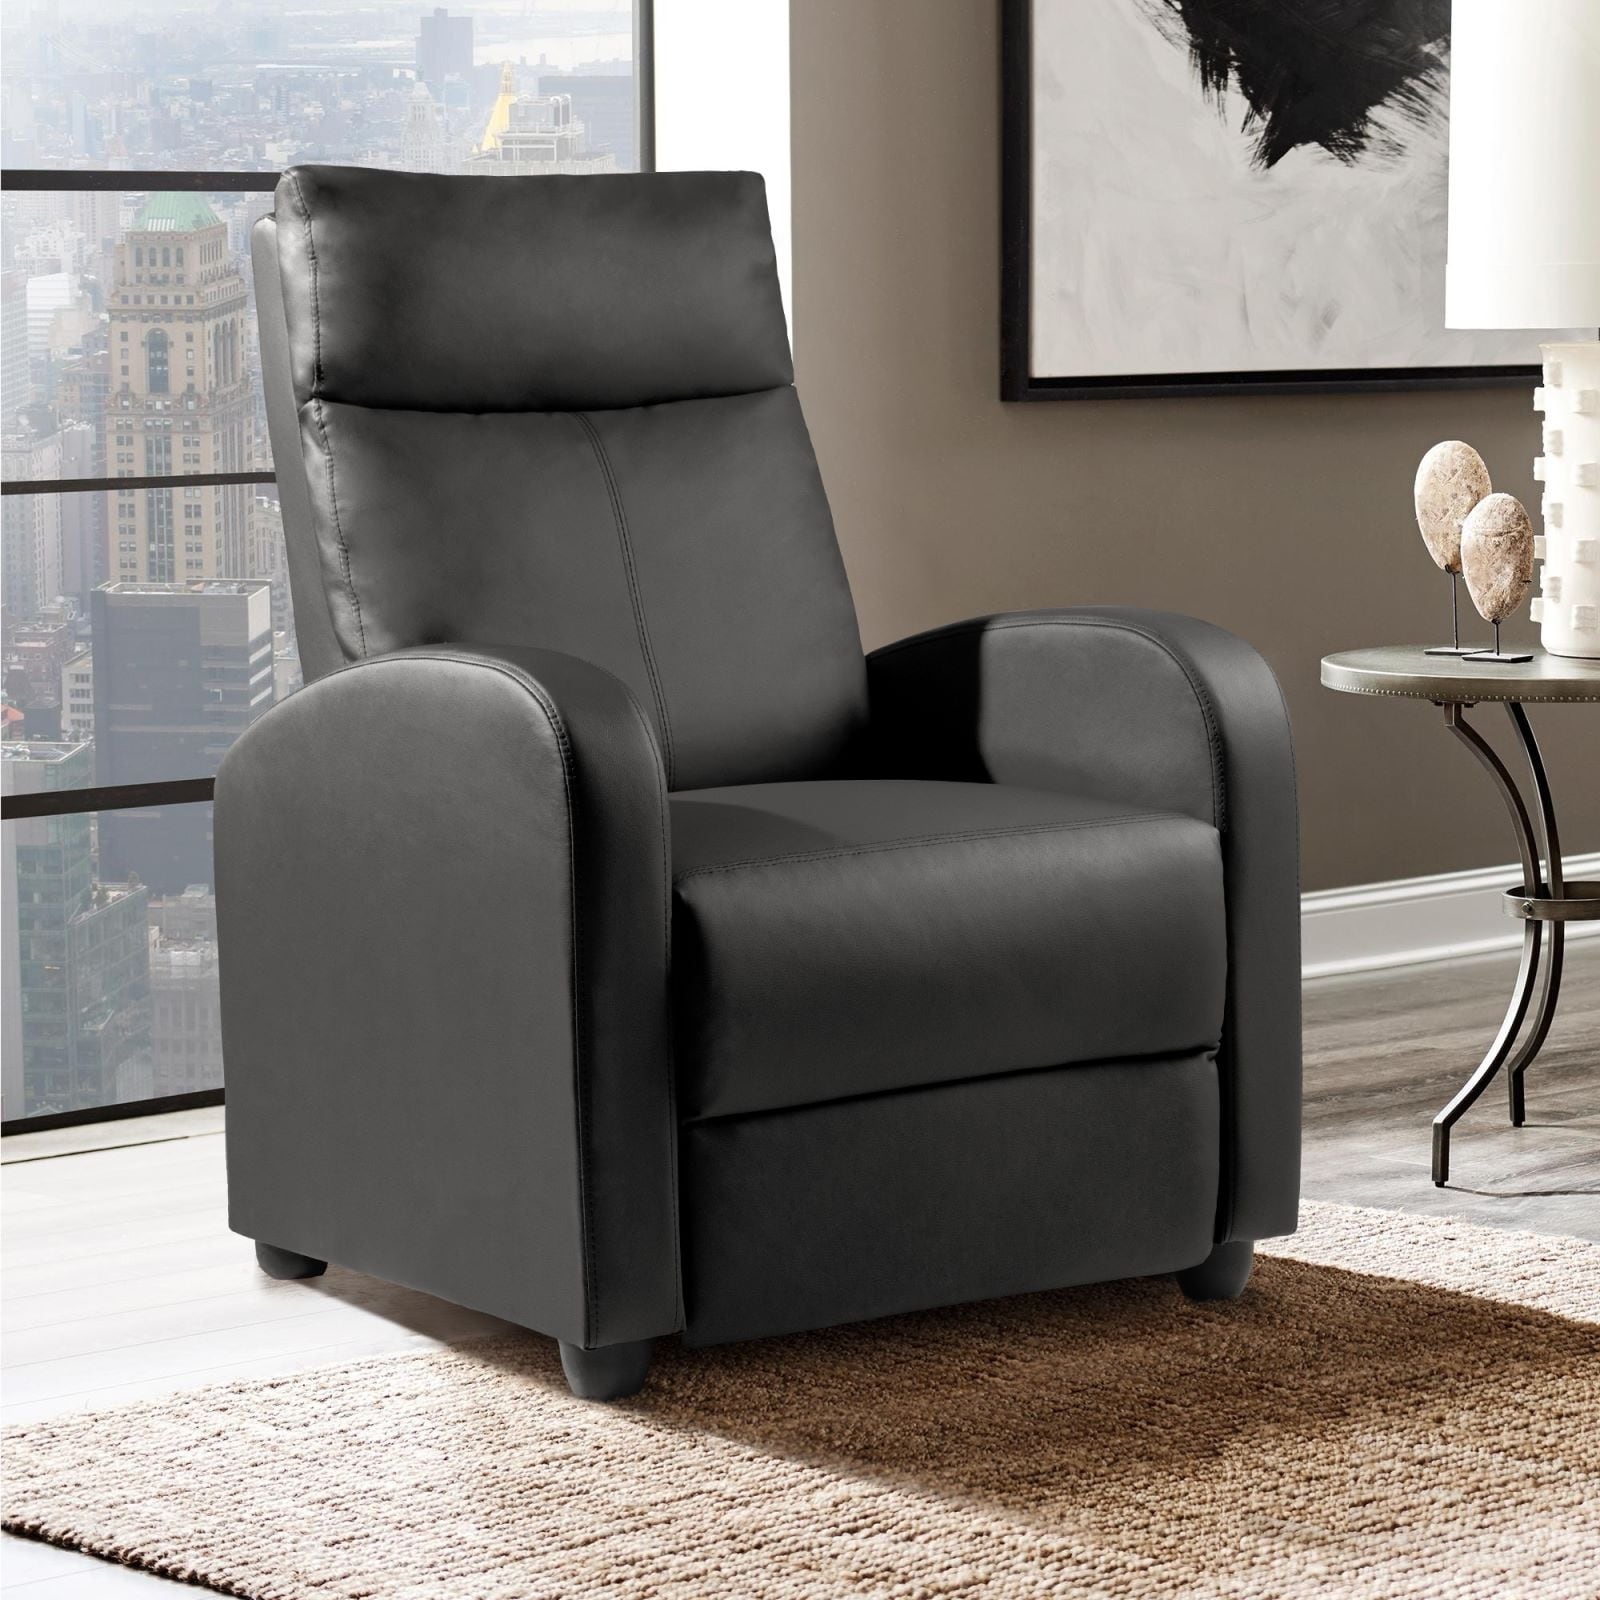 PU Leather Recliner Chair Push Back Recliner Single Sofa Home